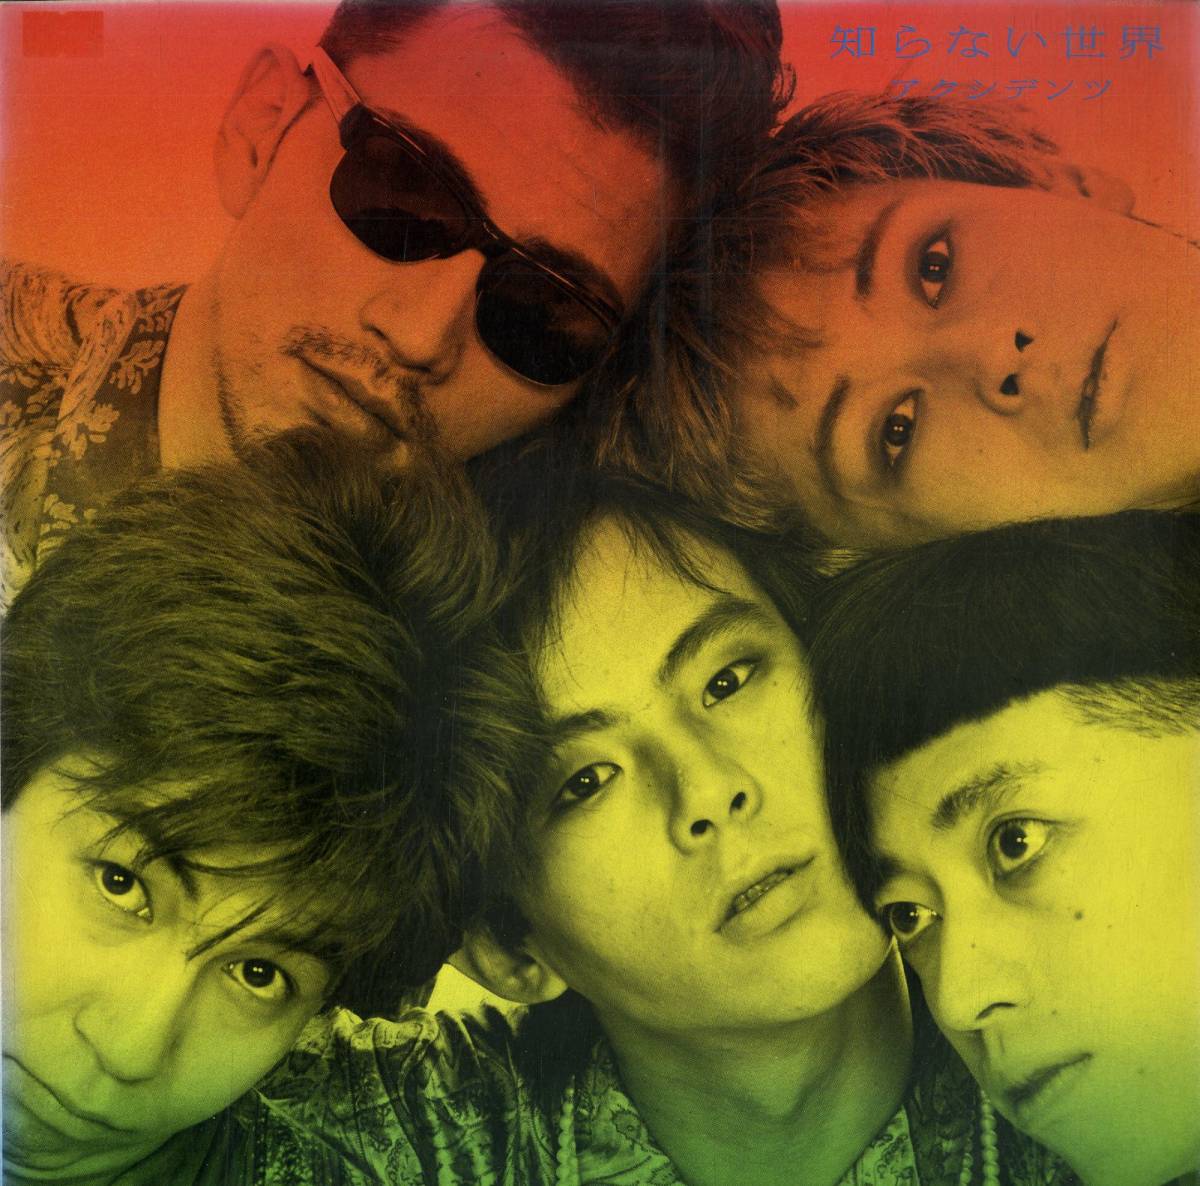 A00516124/LP/THE ACCIDENTS(ジ・アクシデンツ)「知らない世界(1985年・28JAL-3034・下山淳・DATE OF BIRTH編曲参加・インディーロック)_画像1